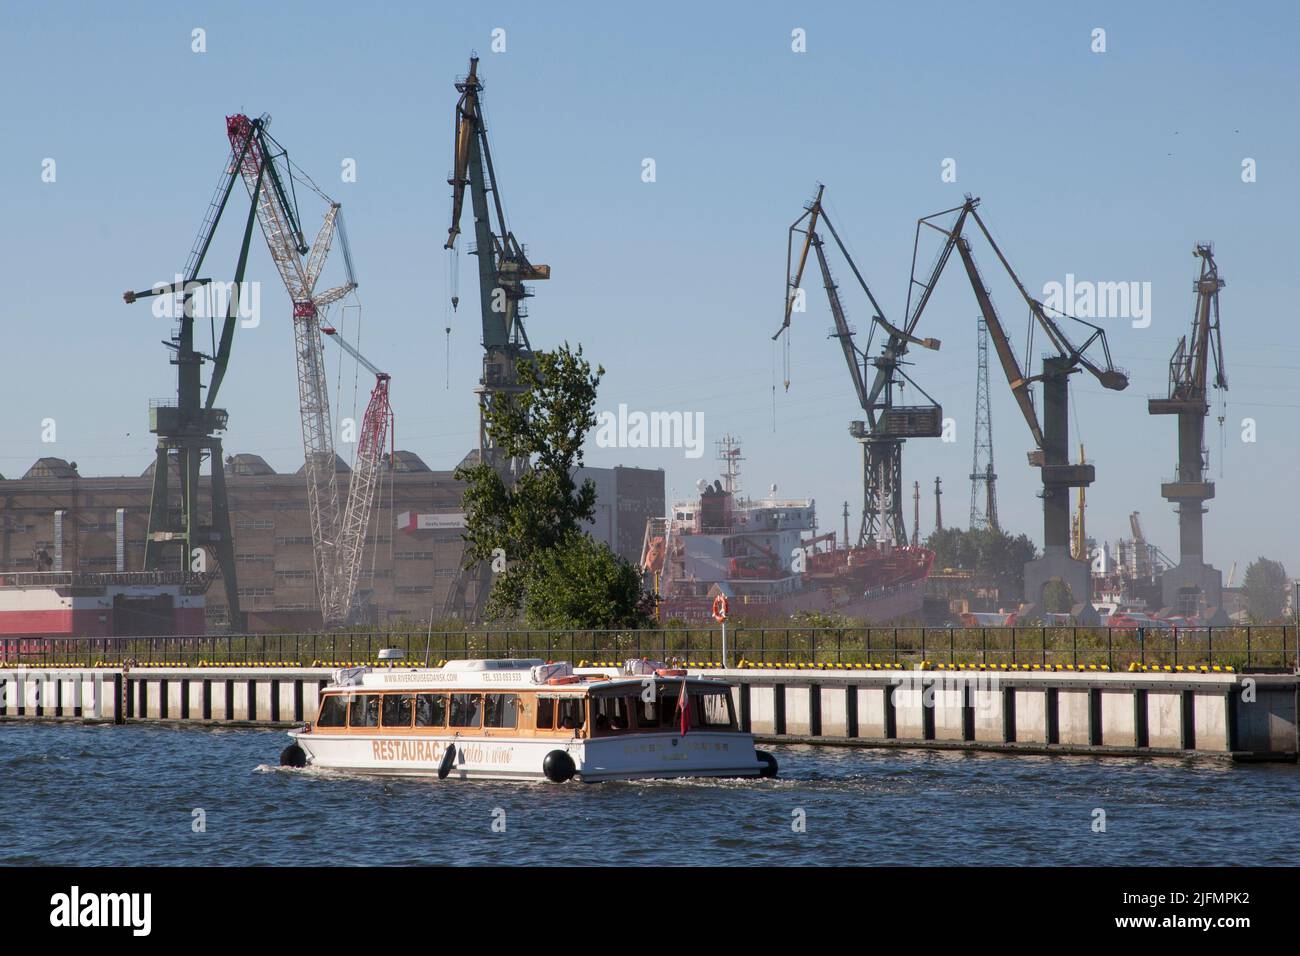 River cruise by Chleb i Wino restaurant boat passes in front of cranes in Gdansk Shipyard, Poland -  River cruise by Chleb i Wino Stocznia Gdansk, Pol Stock Photo